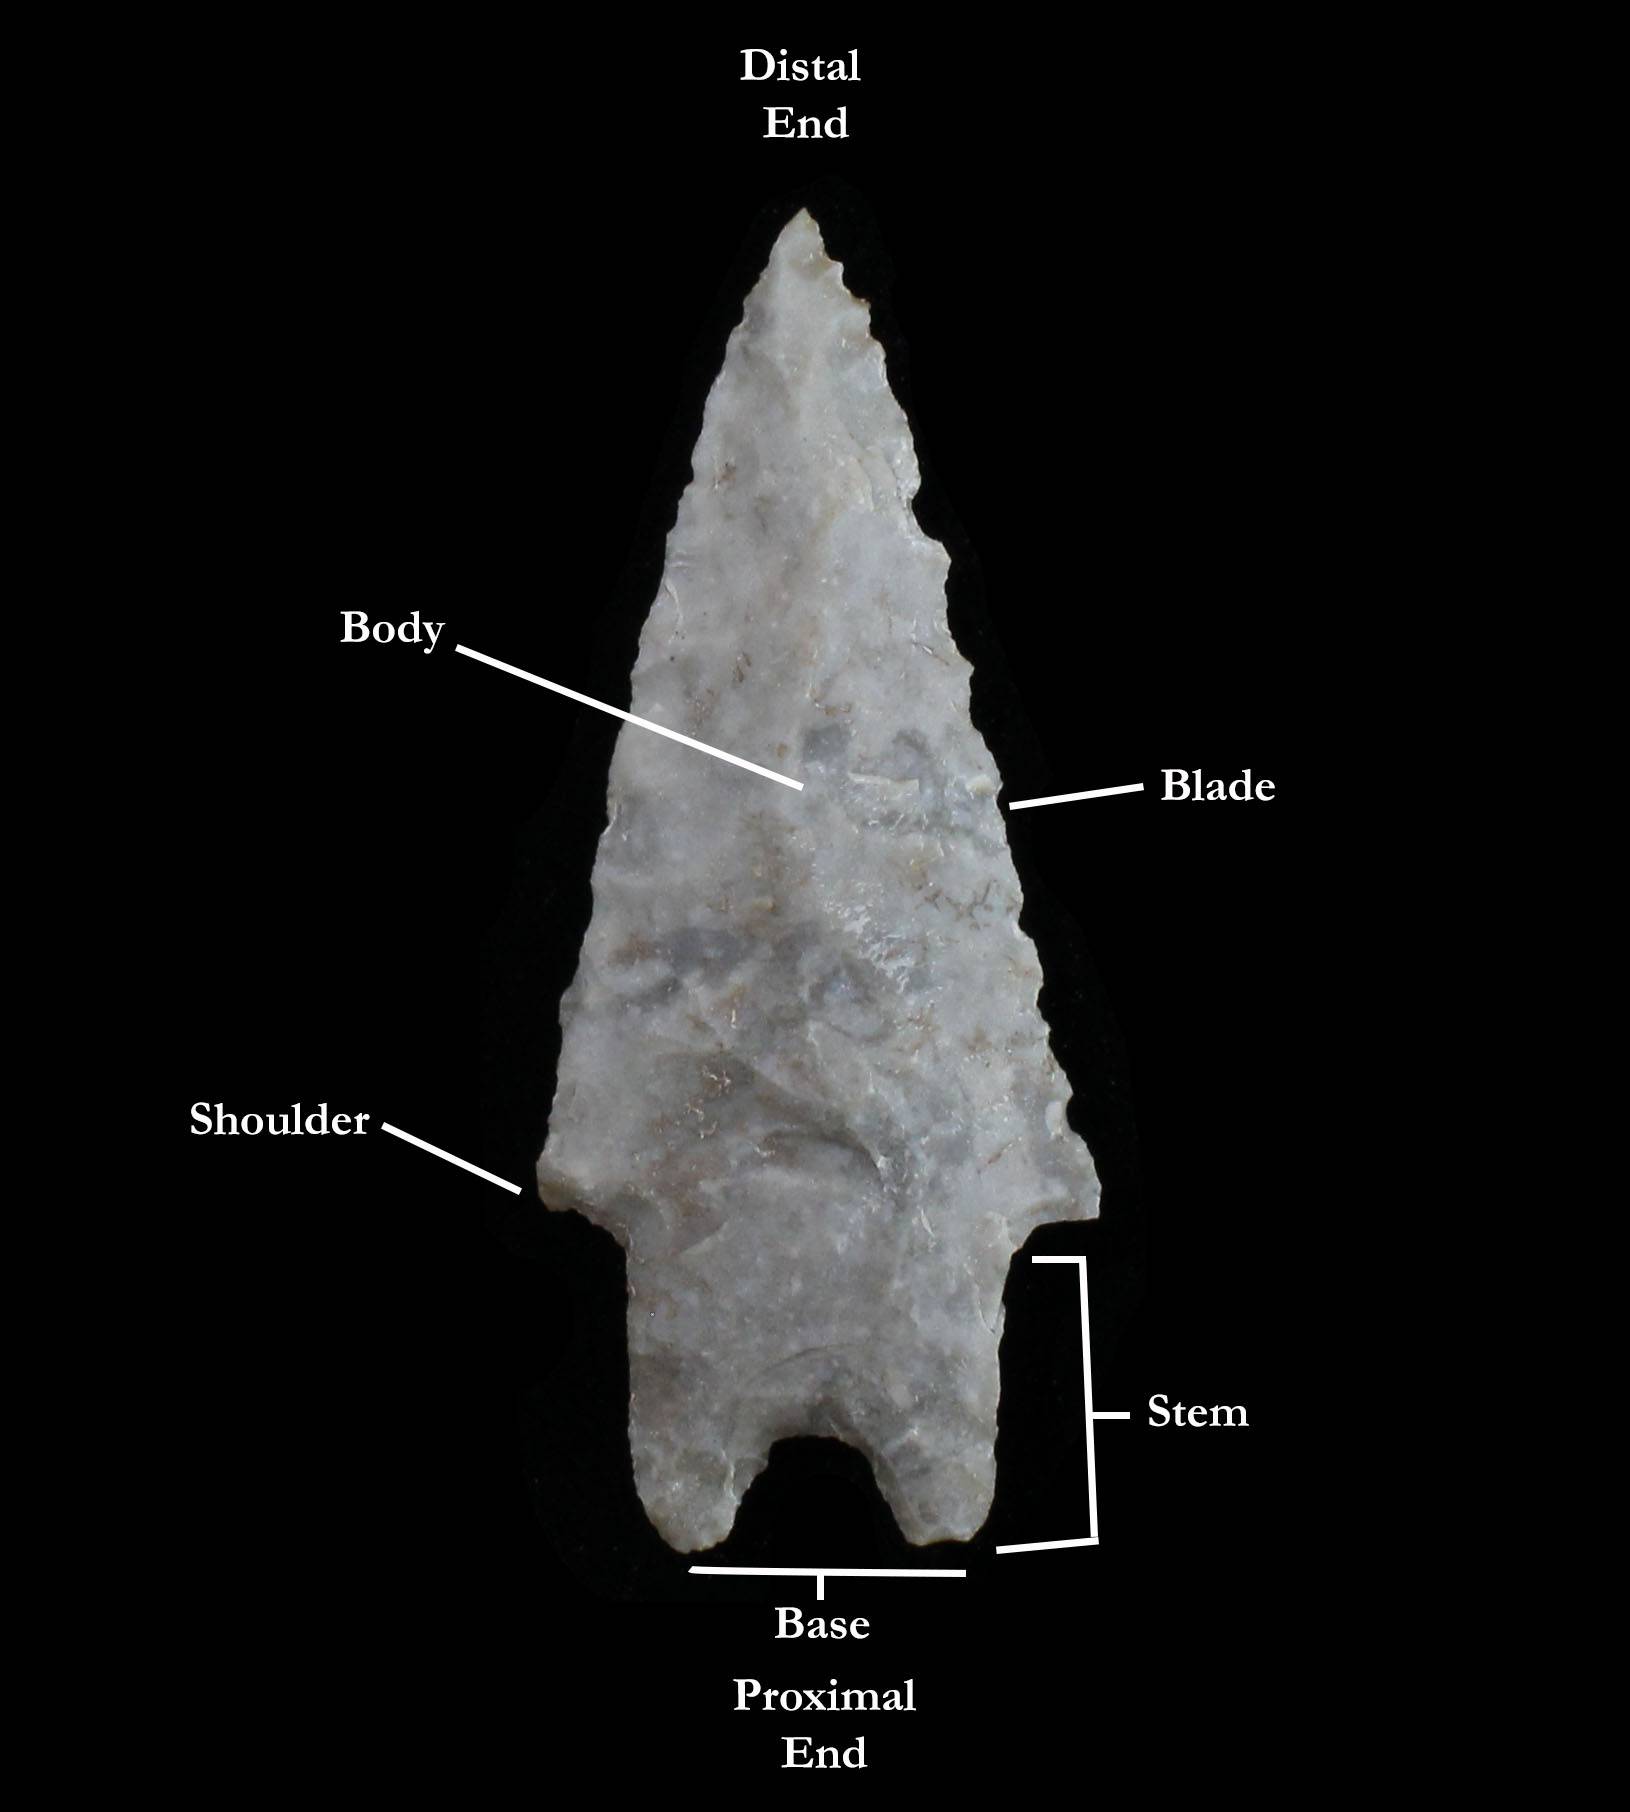 image showing the attributes of a projectile point